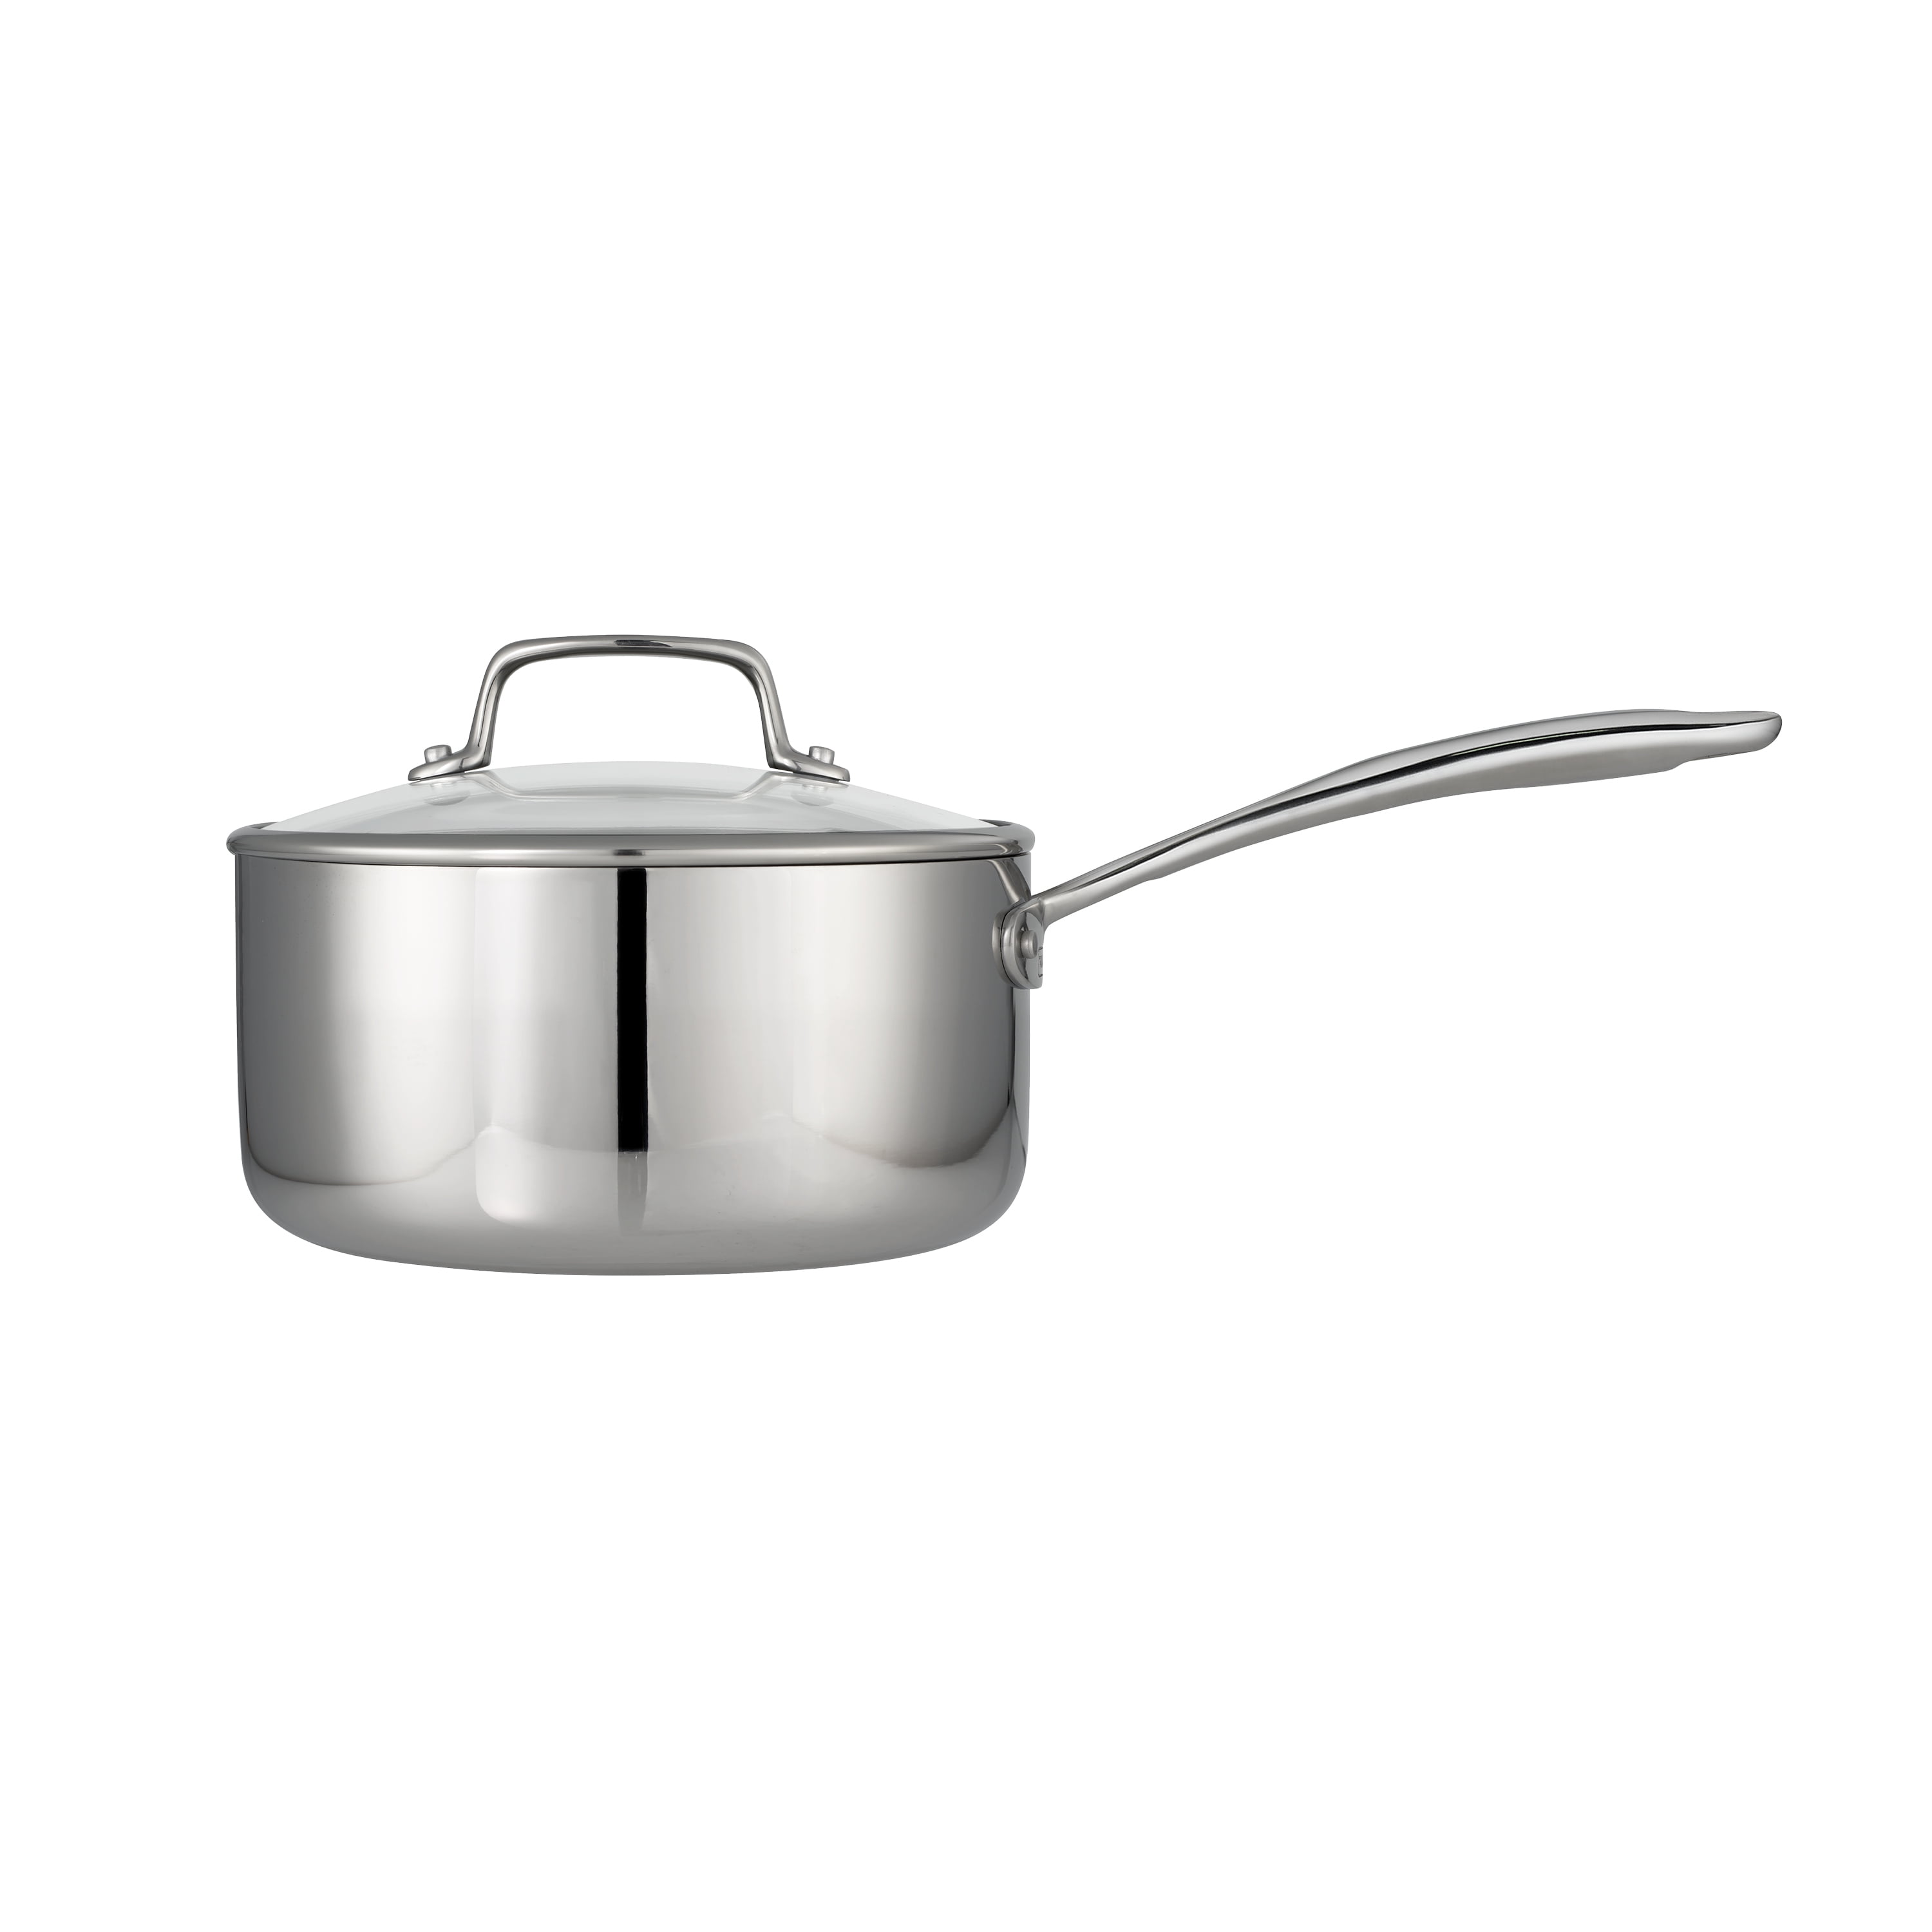 Tramontina Brava Stainless Steel Pan Triple Bottom with Flat Lid and Handle 16 cm 1.4 L 62401160